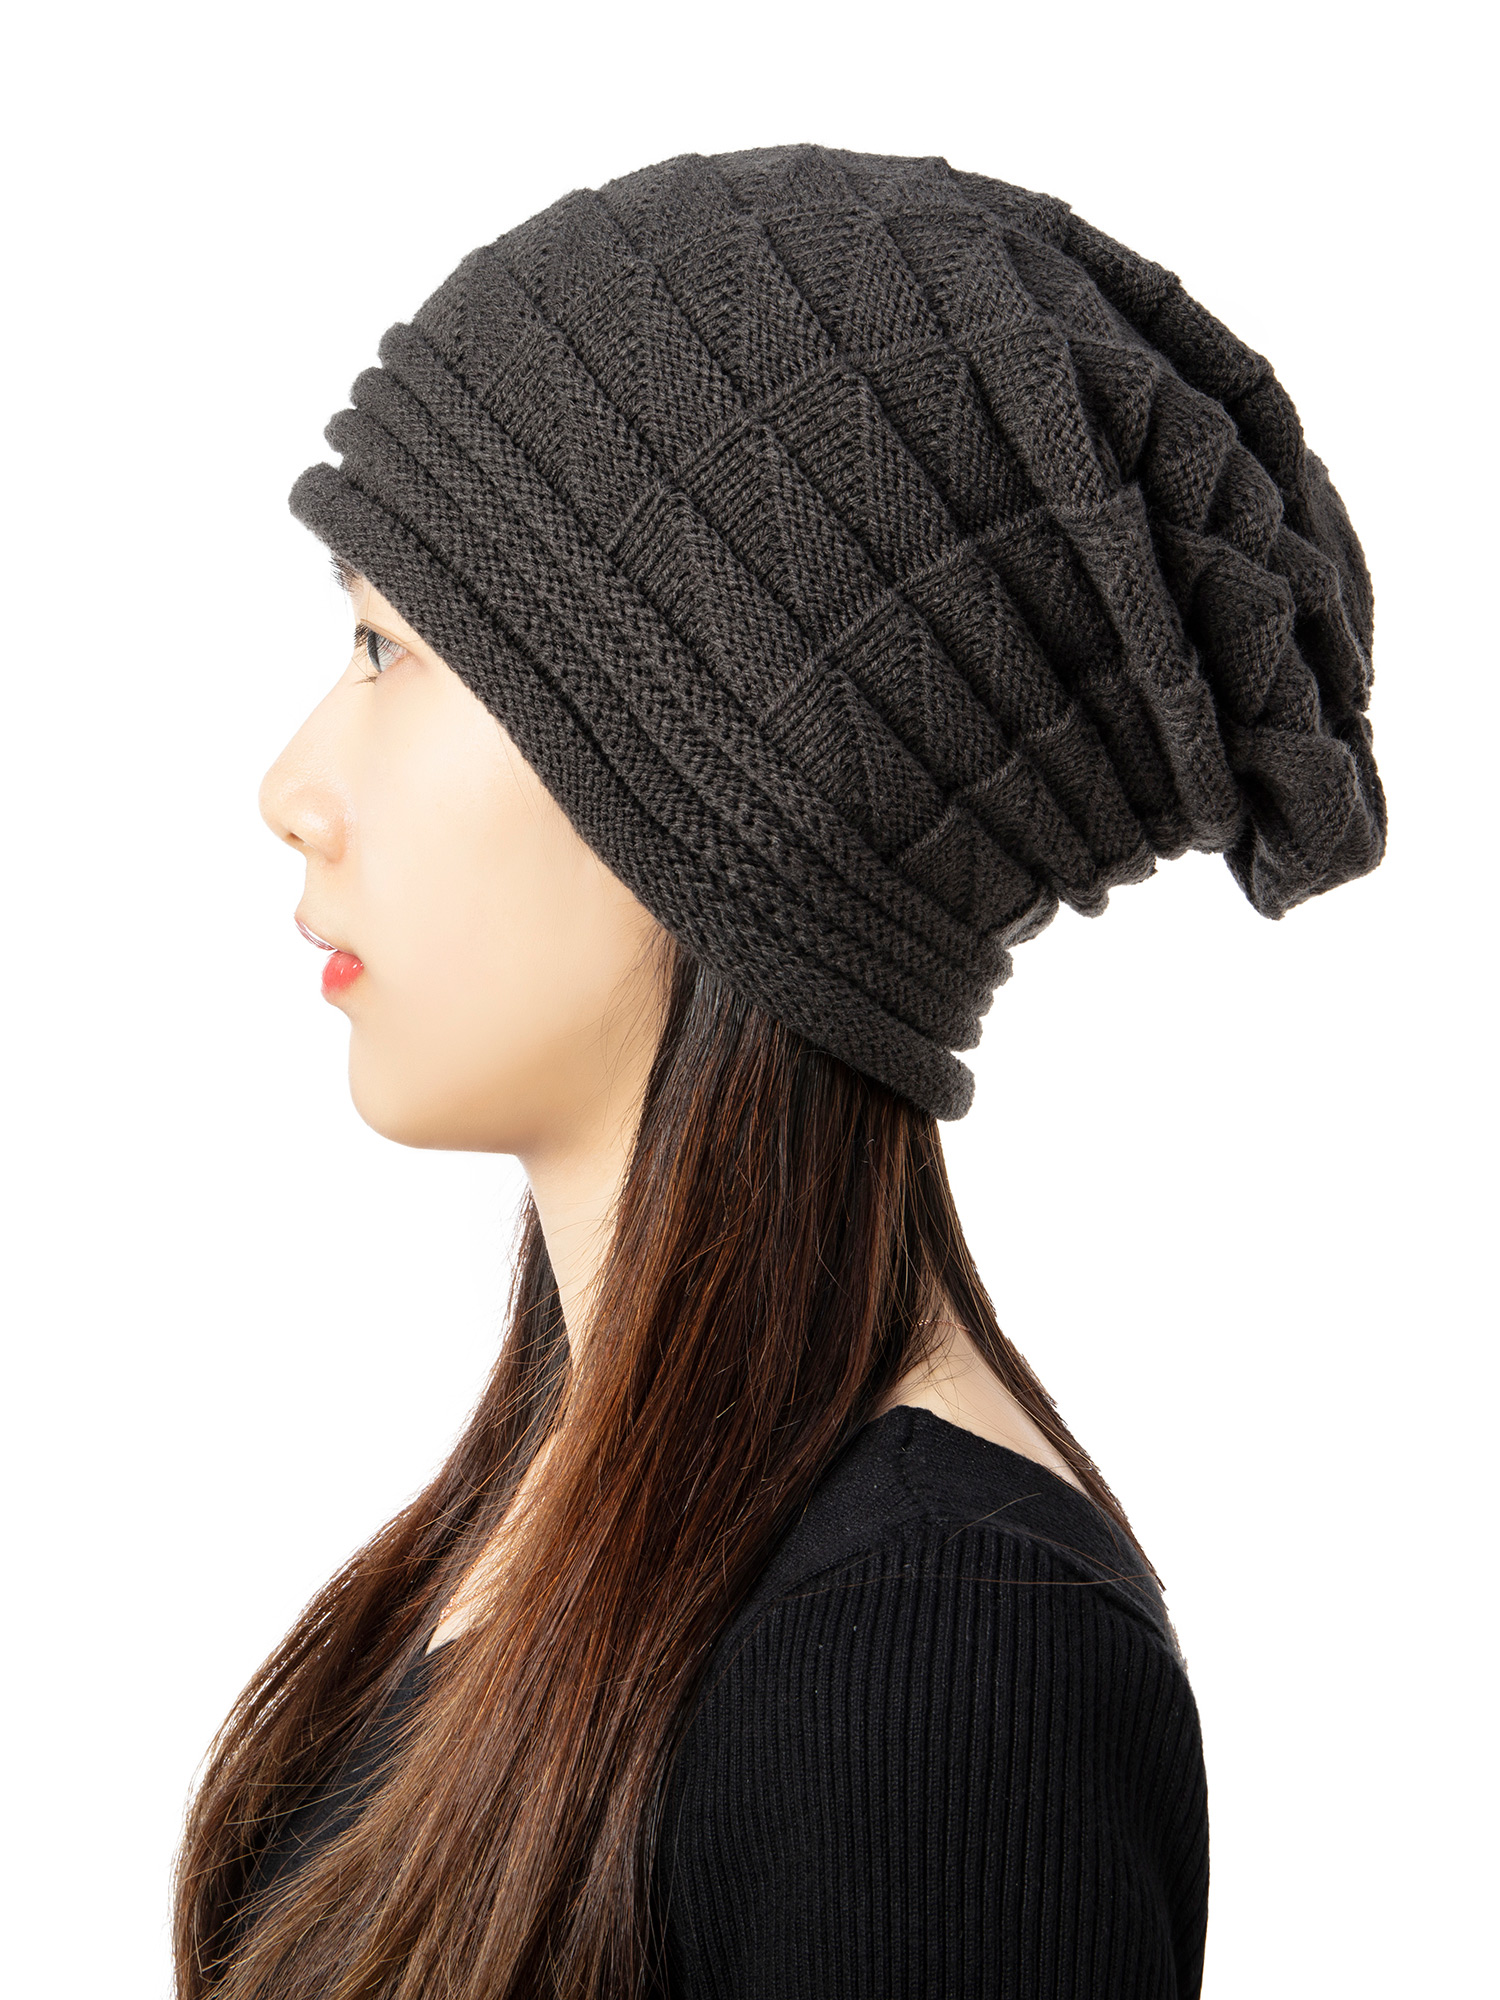 Fashion Autumn Winter Girl Beanie Hat Women Slouch Winter Knit Hip-hop Cap Beanie Baggy Hat Ski Crochet Oversized Chunky Stretchy Slouchy Beanie Hat 2 Pack - image 5 of 8